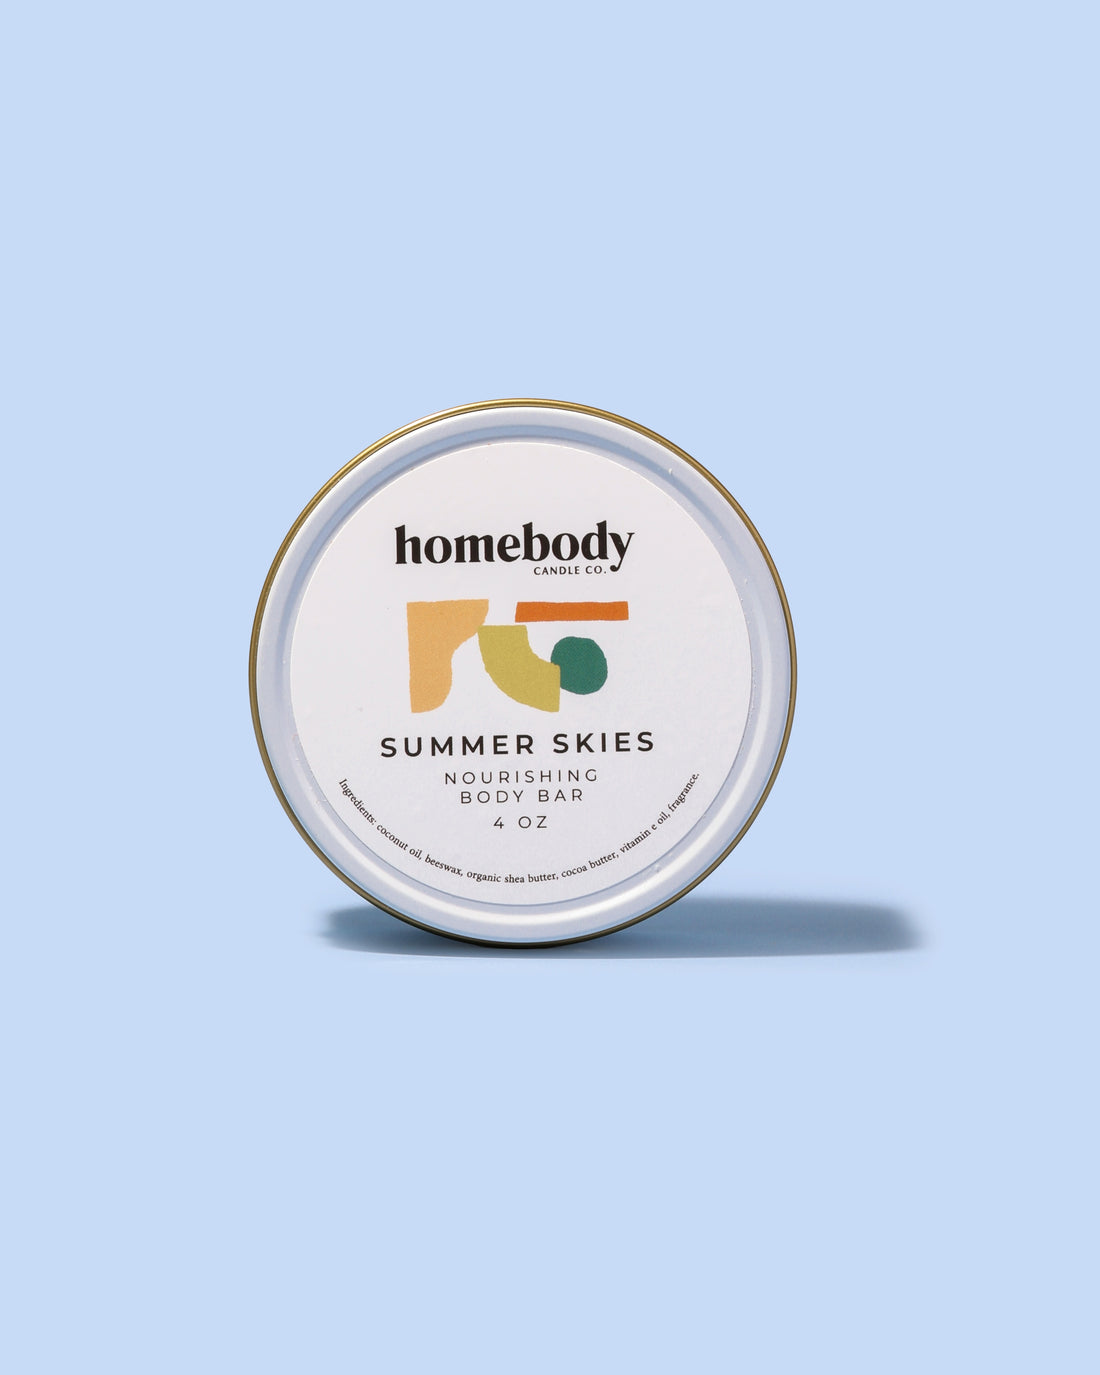 Summer Skies body bar Homebody Candle Co